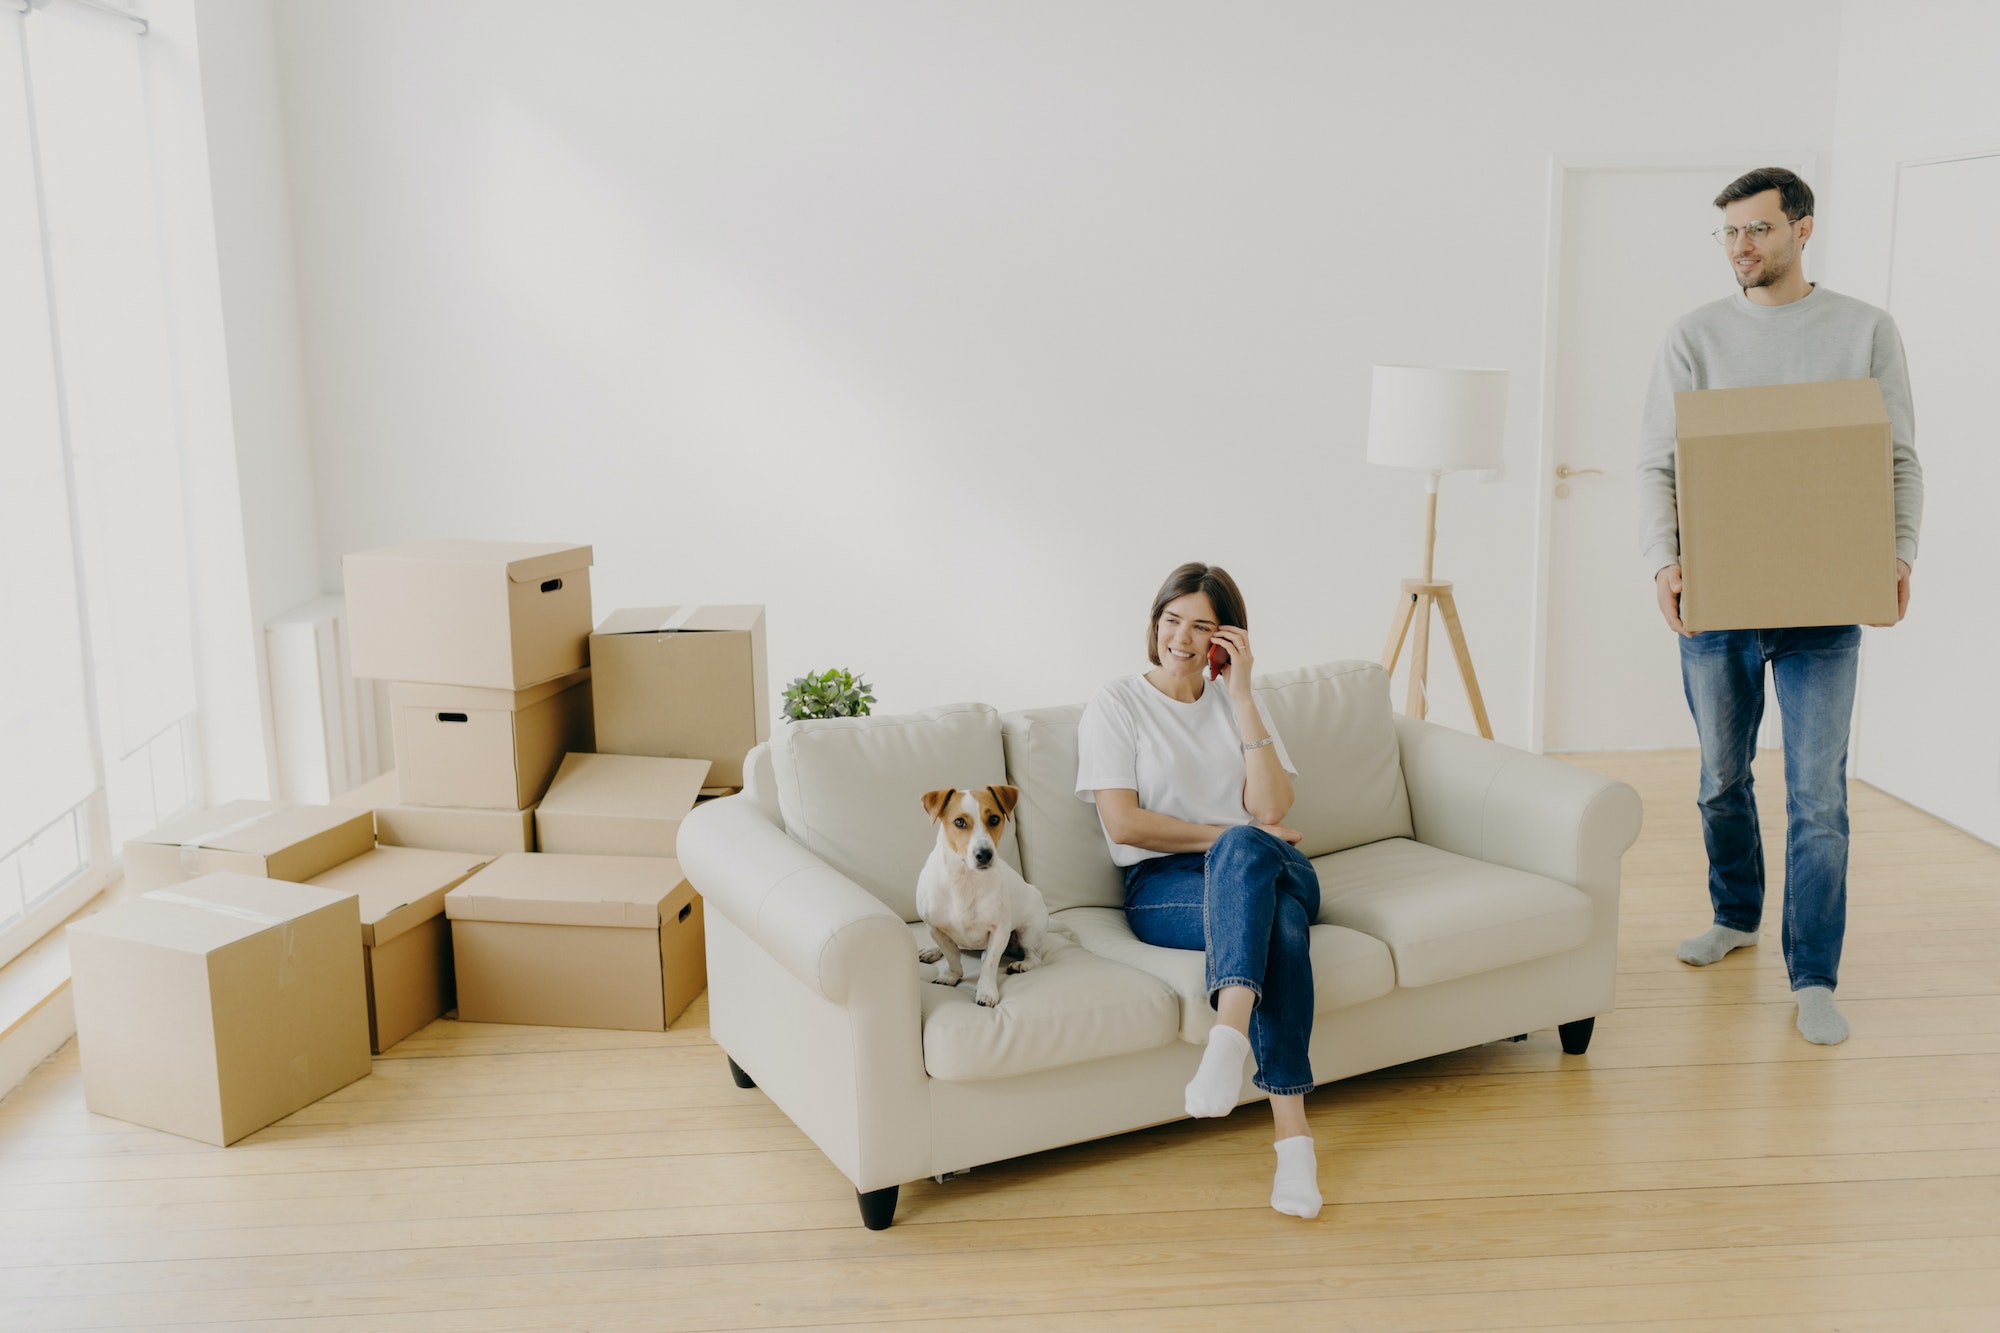 Loving spouses pose in rented apartment, woman relaxes on couch with pet